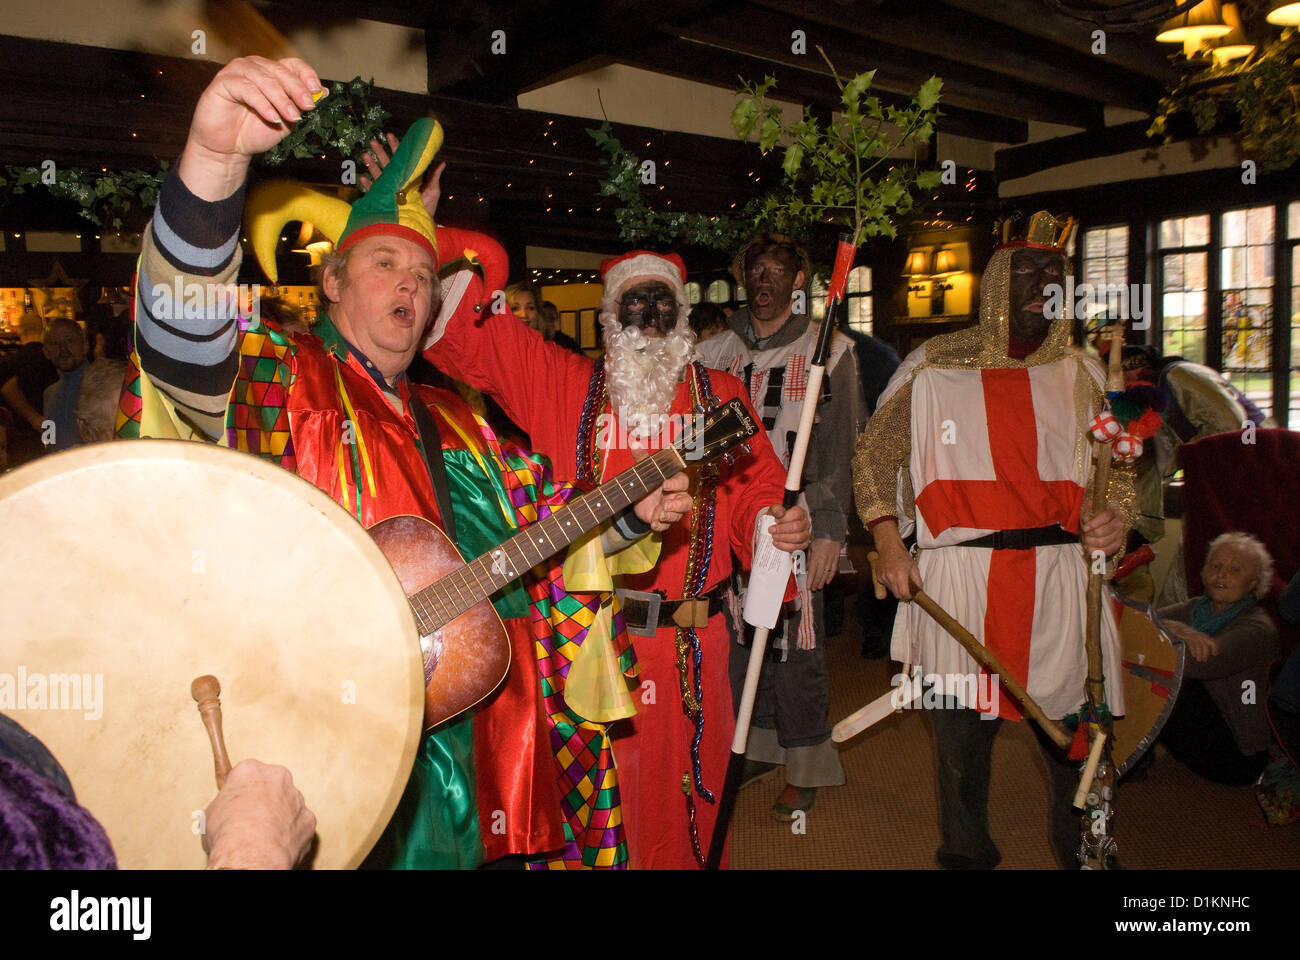 Local amateur dramatics group putting on an xmas play in local pubs on Boxing Day (26 December), Chiddingfold, Surrey, UK. Stock Photo